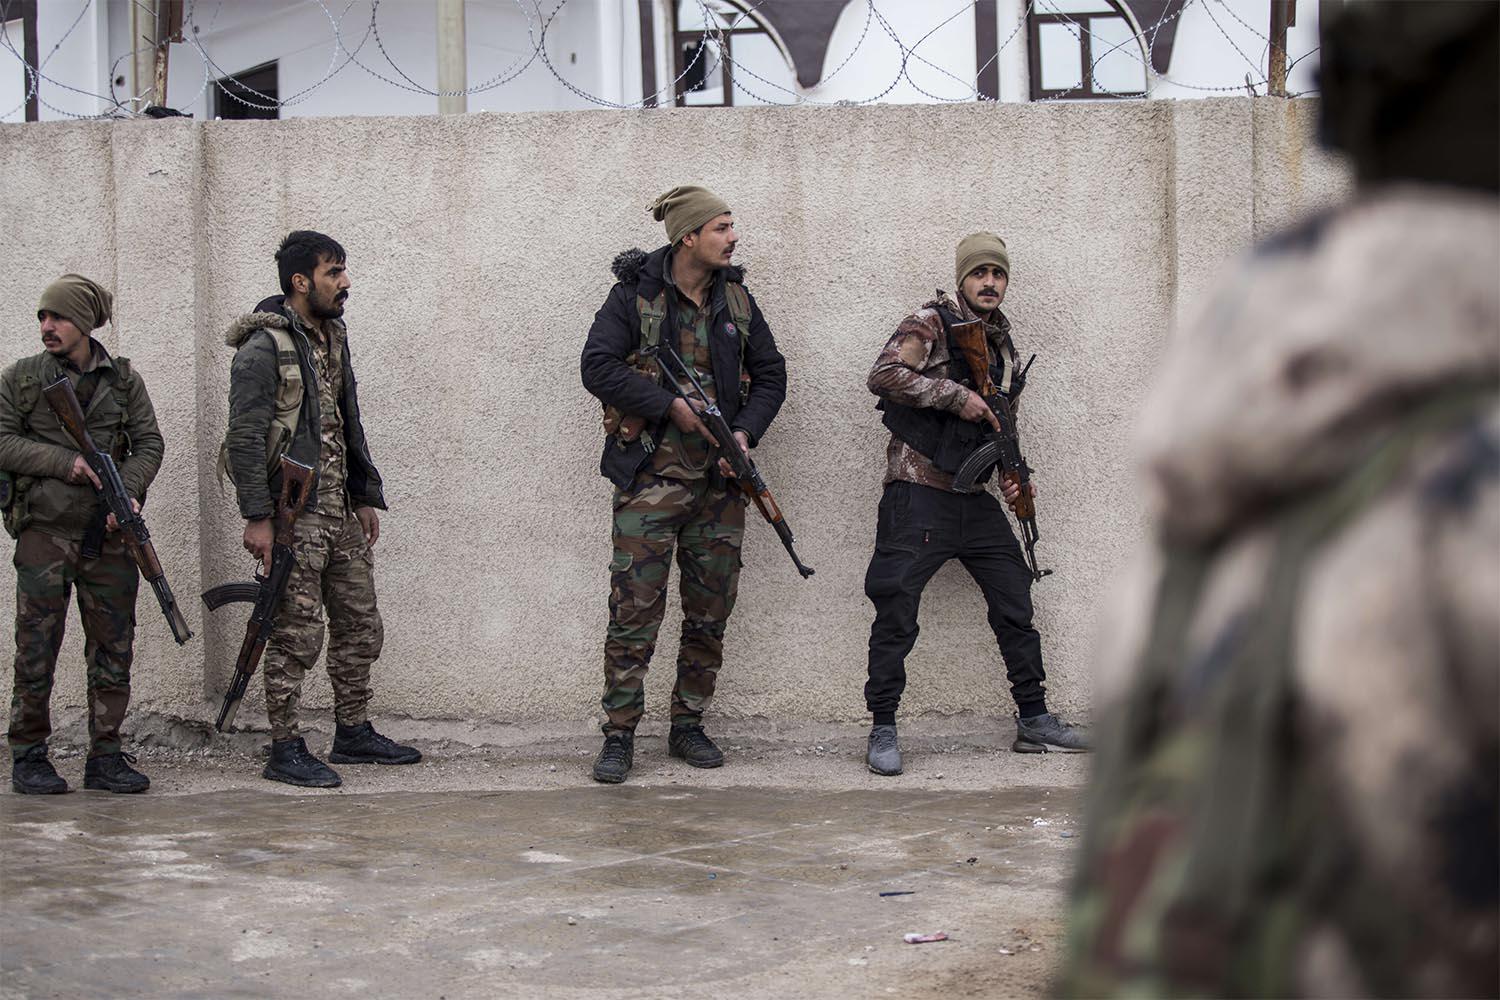 Dozens of armed Islamic State militants remained holed up in Gweiran prison